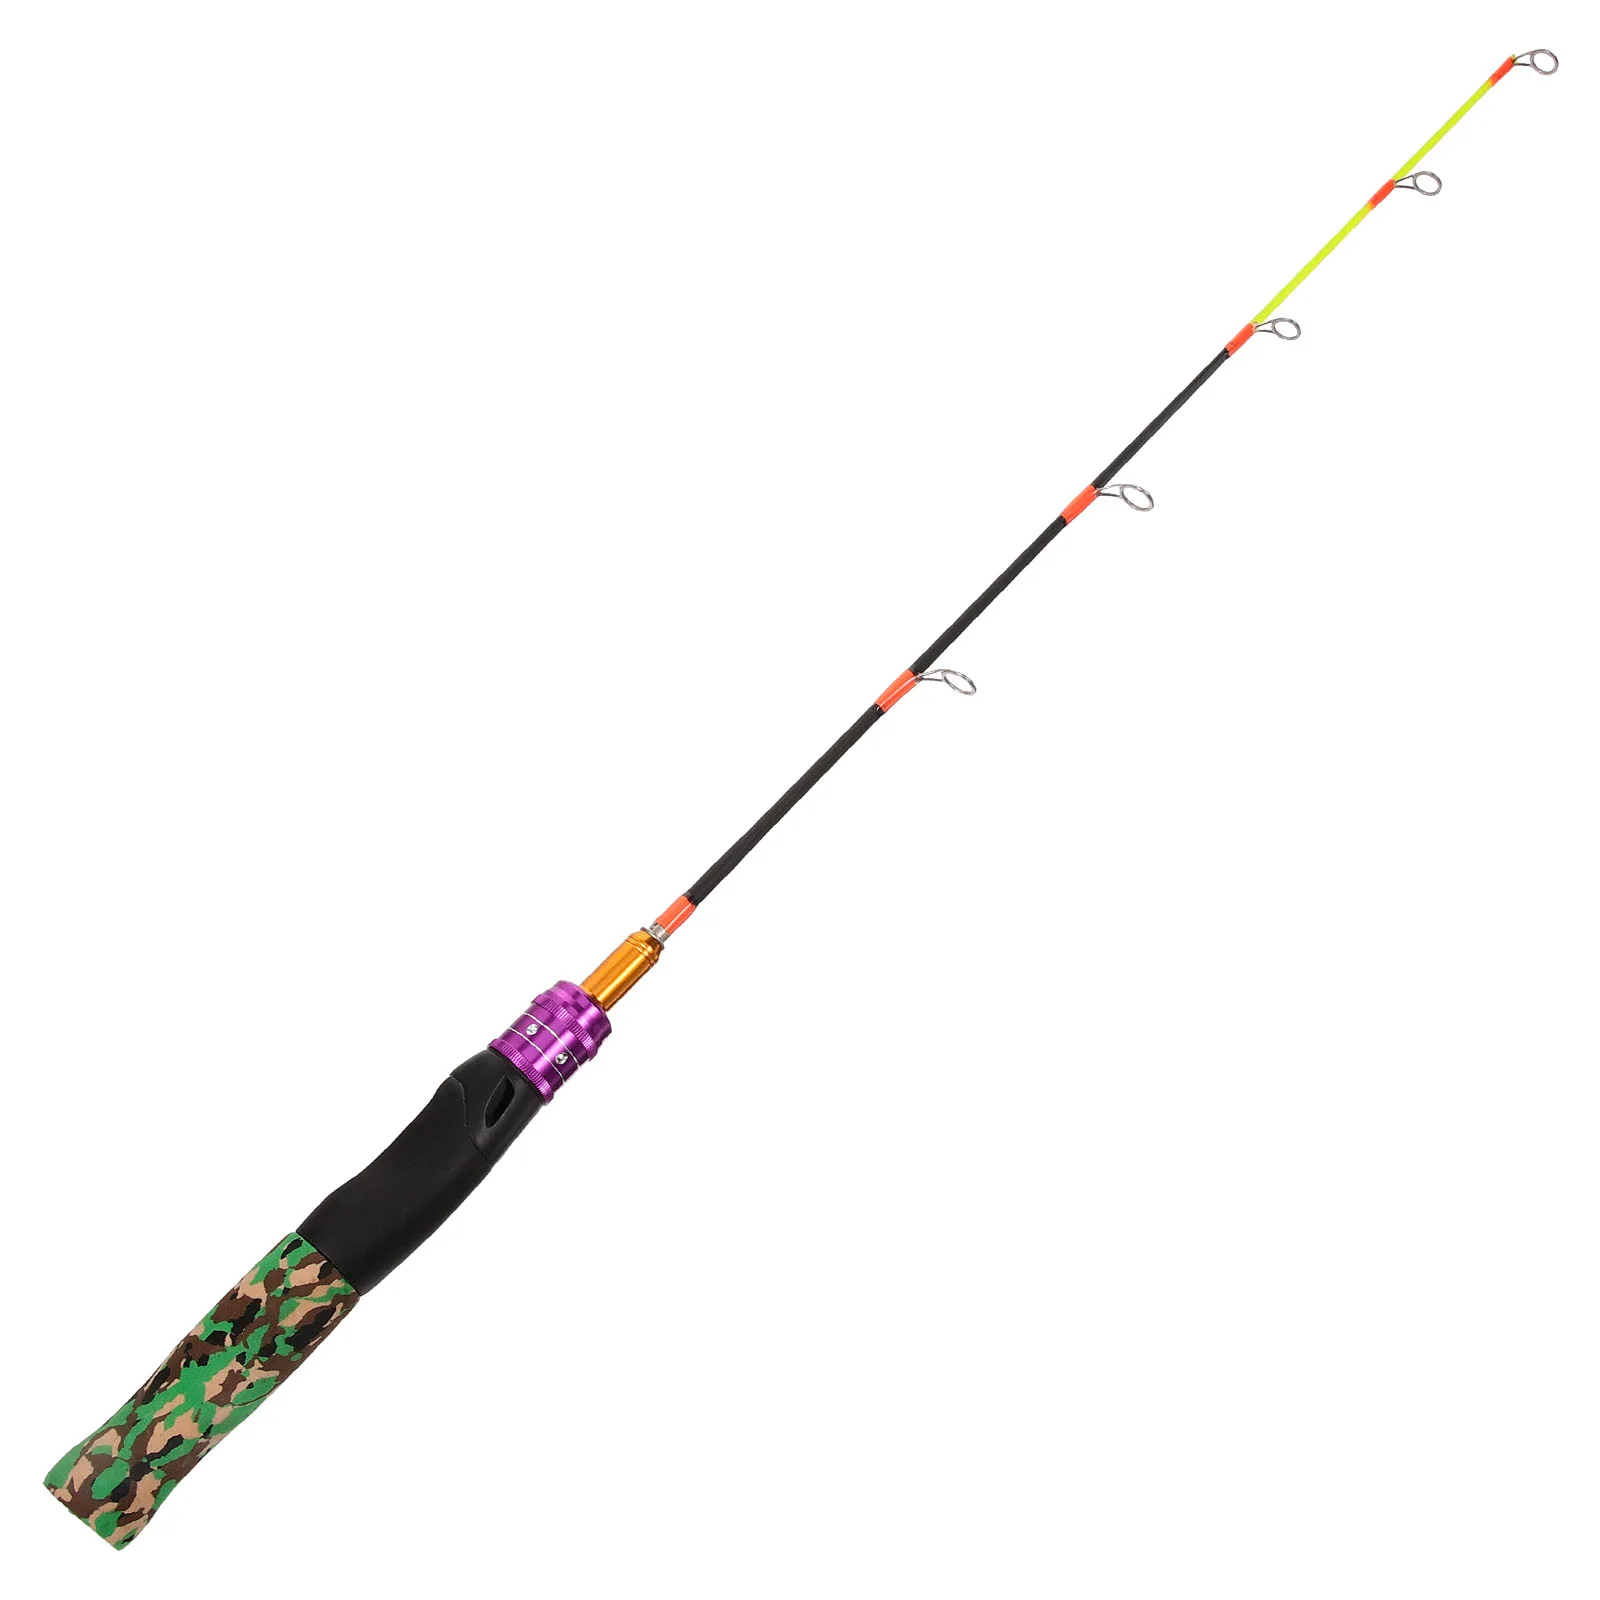 

Fishing Pole Winter Rod for Carp Accessory Shrimp Reusable Telescopic Angling Wear-resistant Child